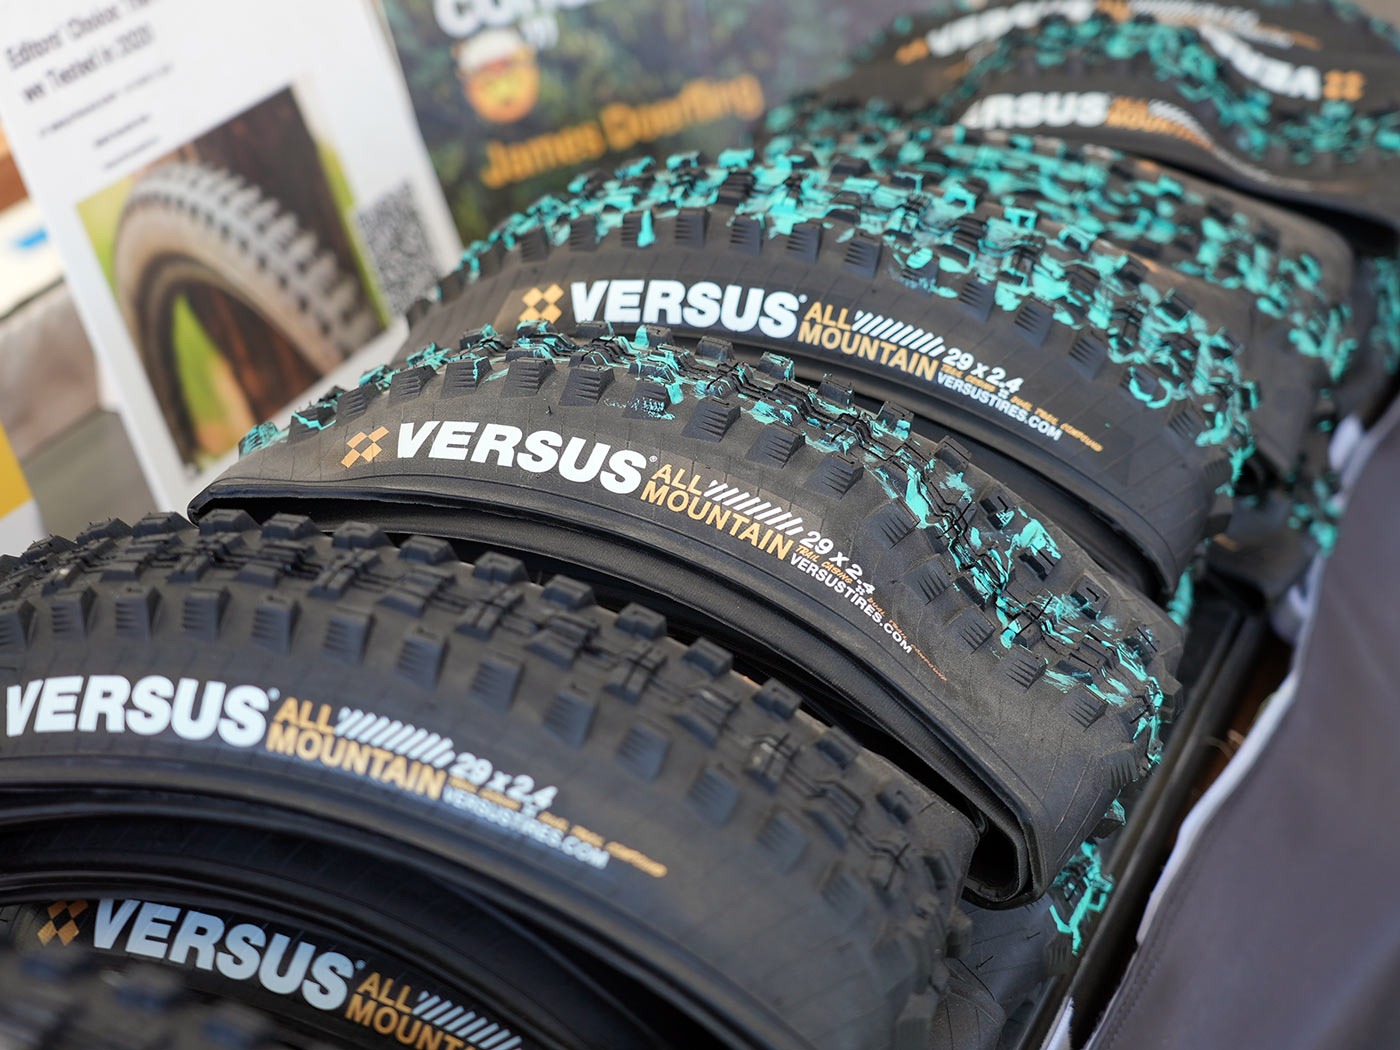 Versus mountain bike tires with colored patterns